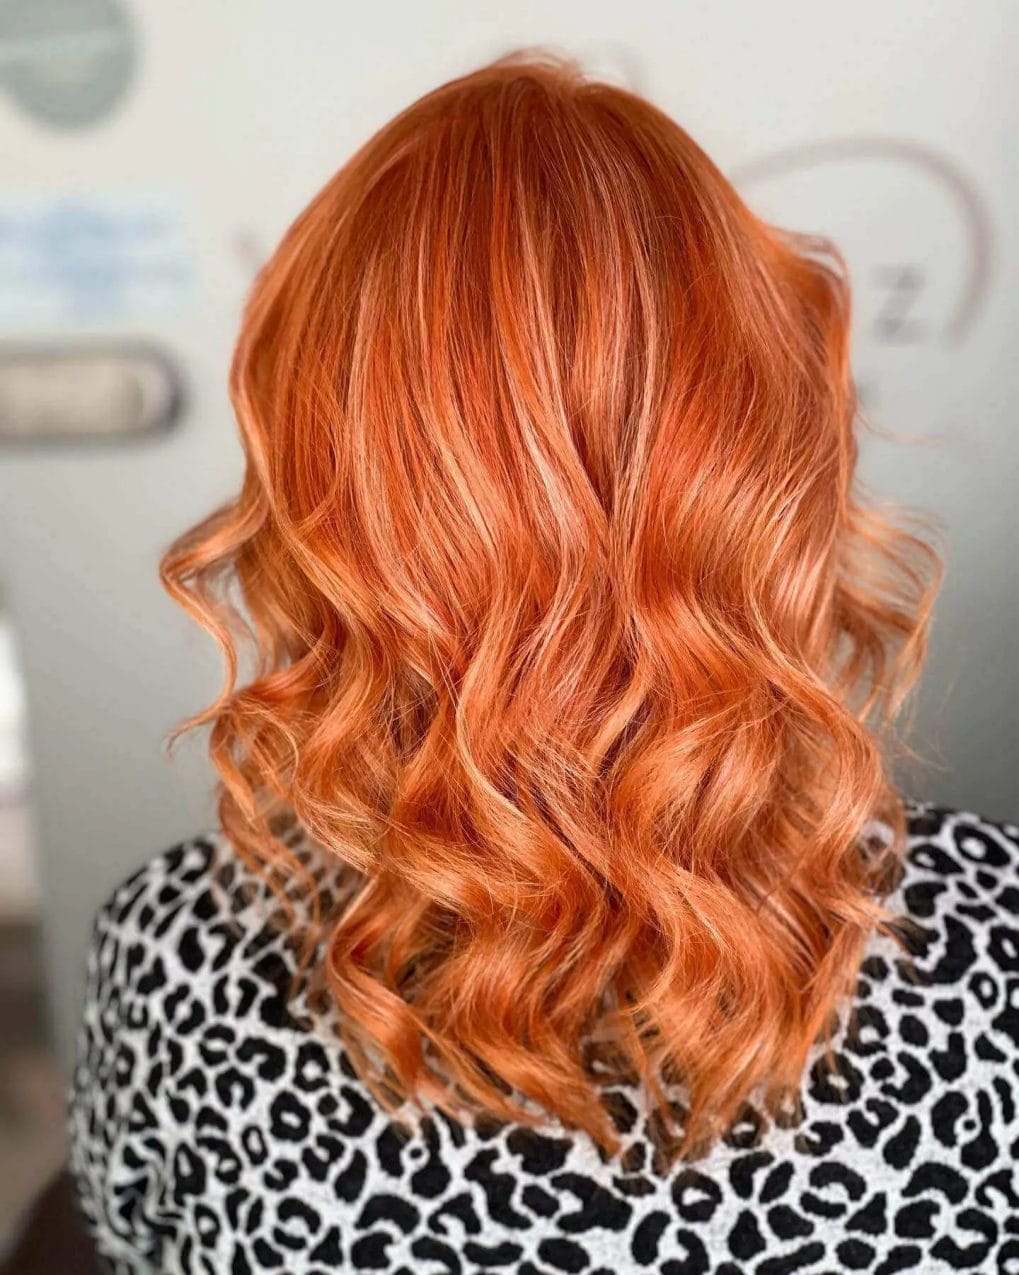 Long layers with fiery reds and oranges in playful waves.